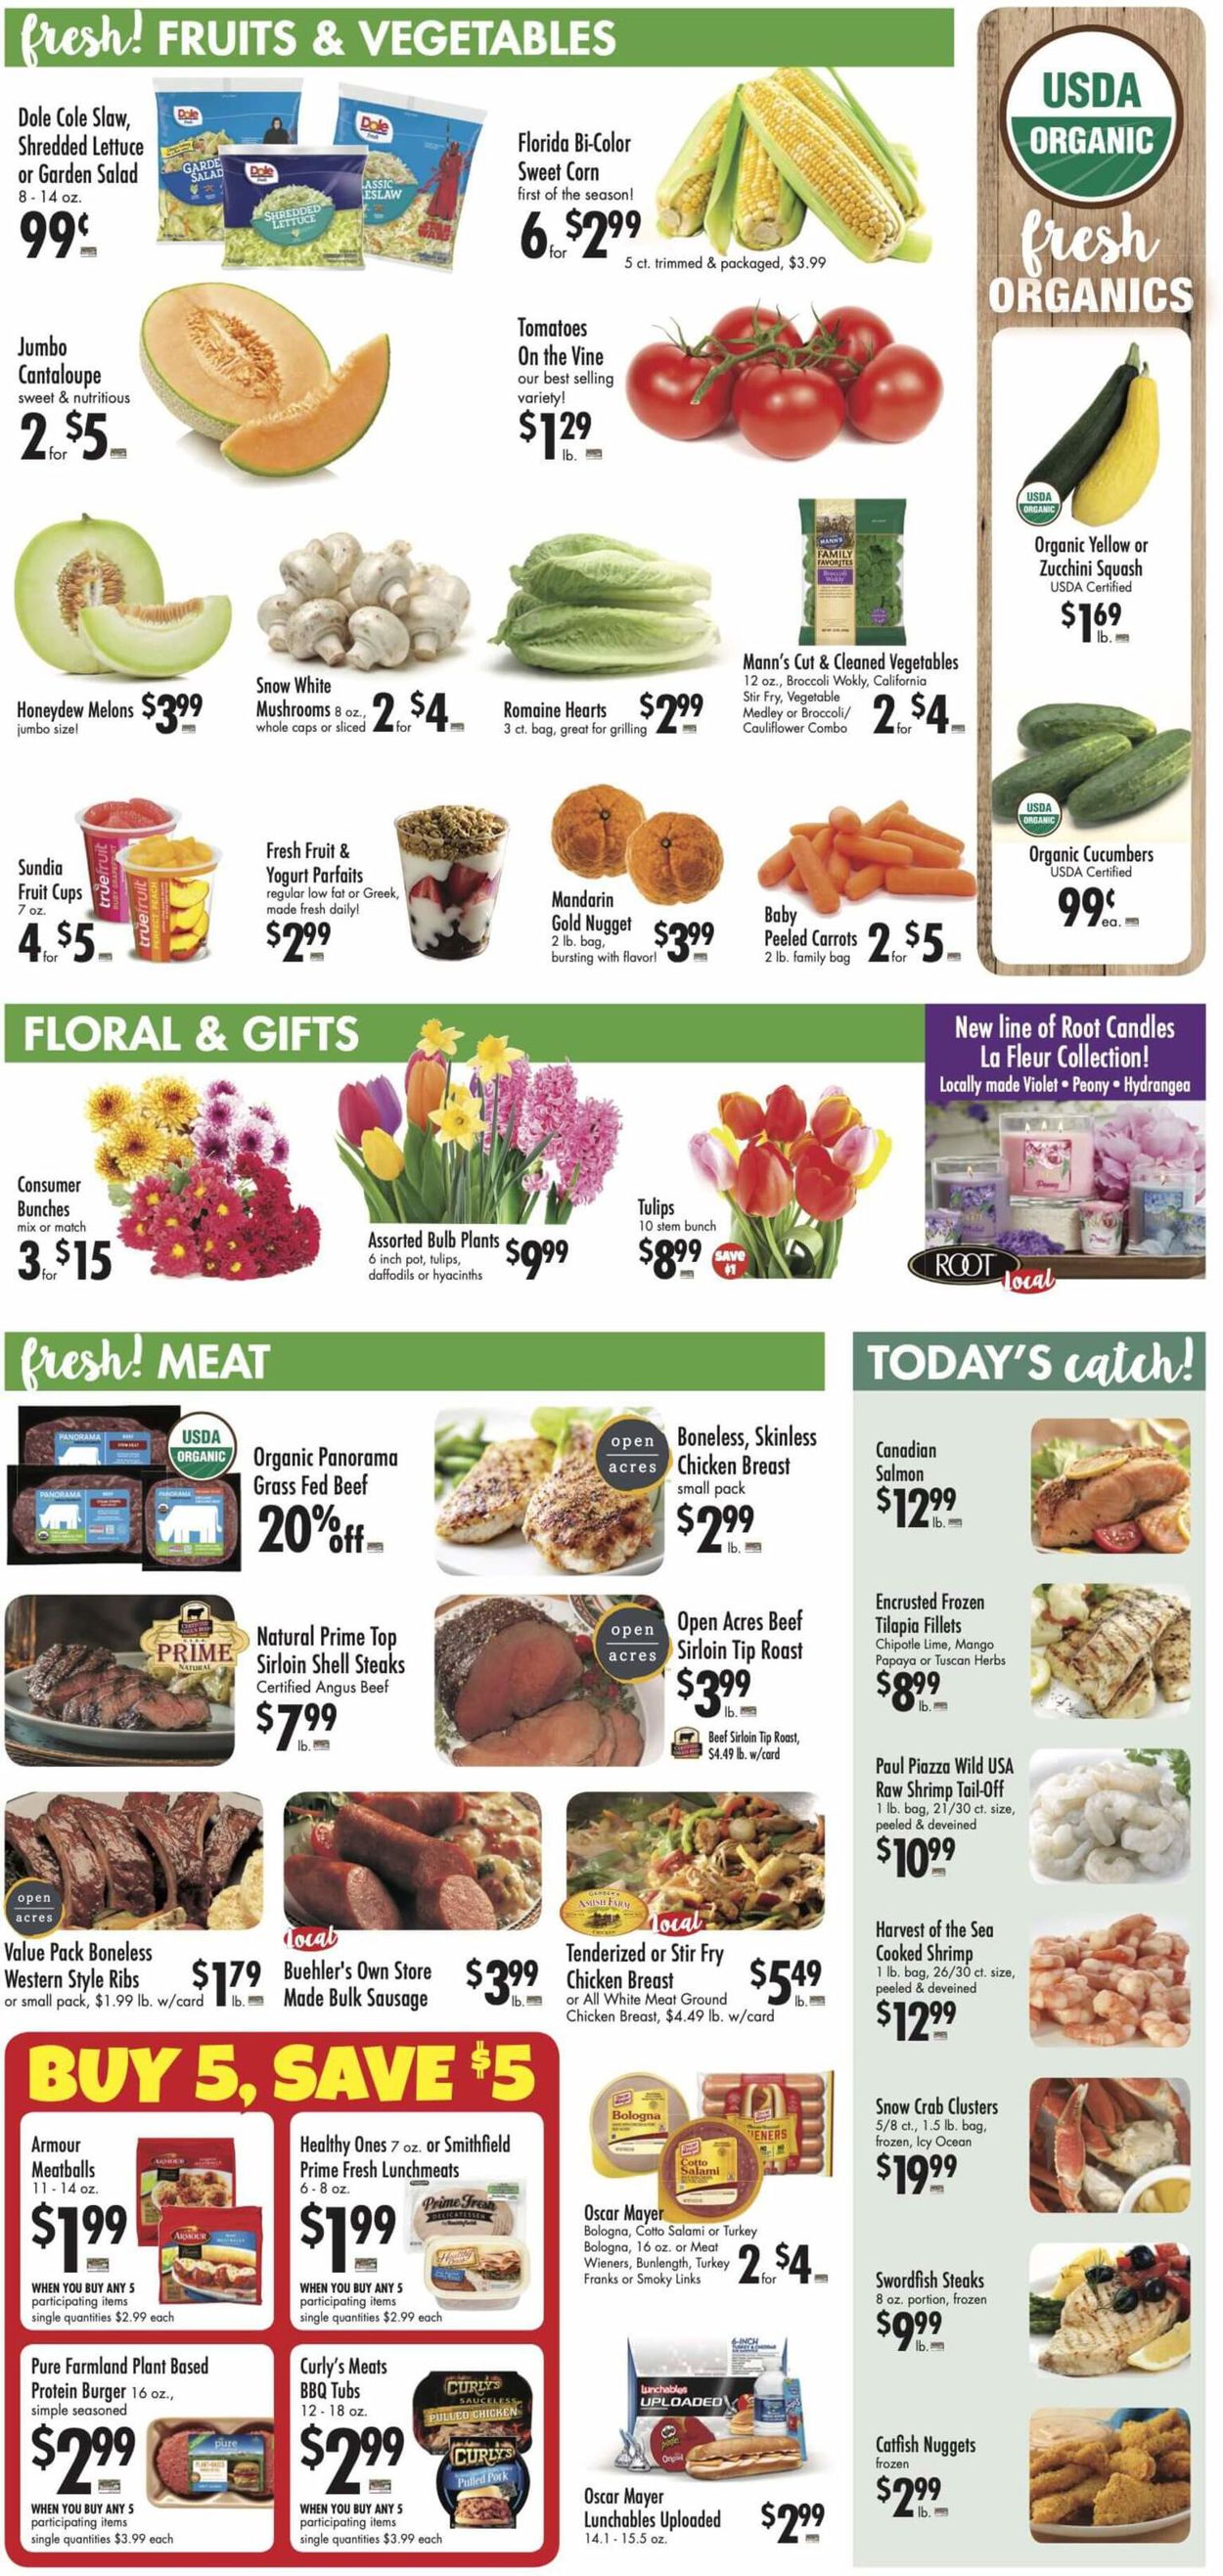 Catalogue Buehler's Fresh Foods from 04/14/2021